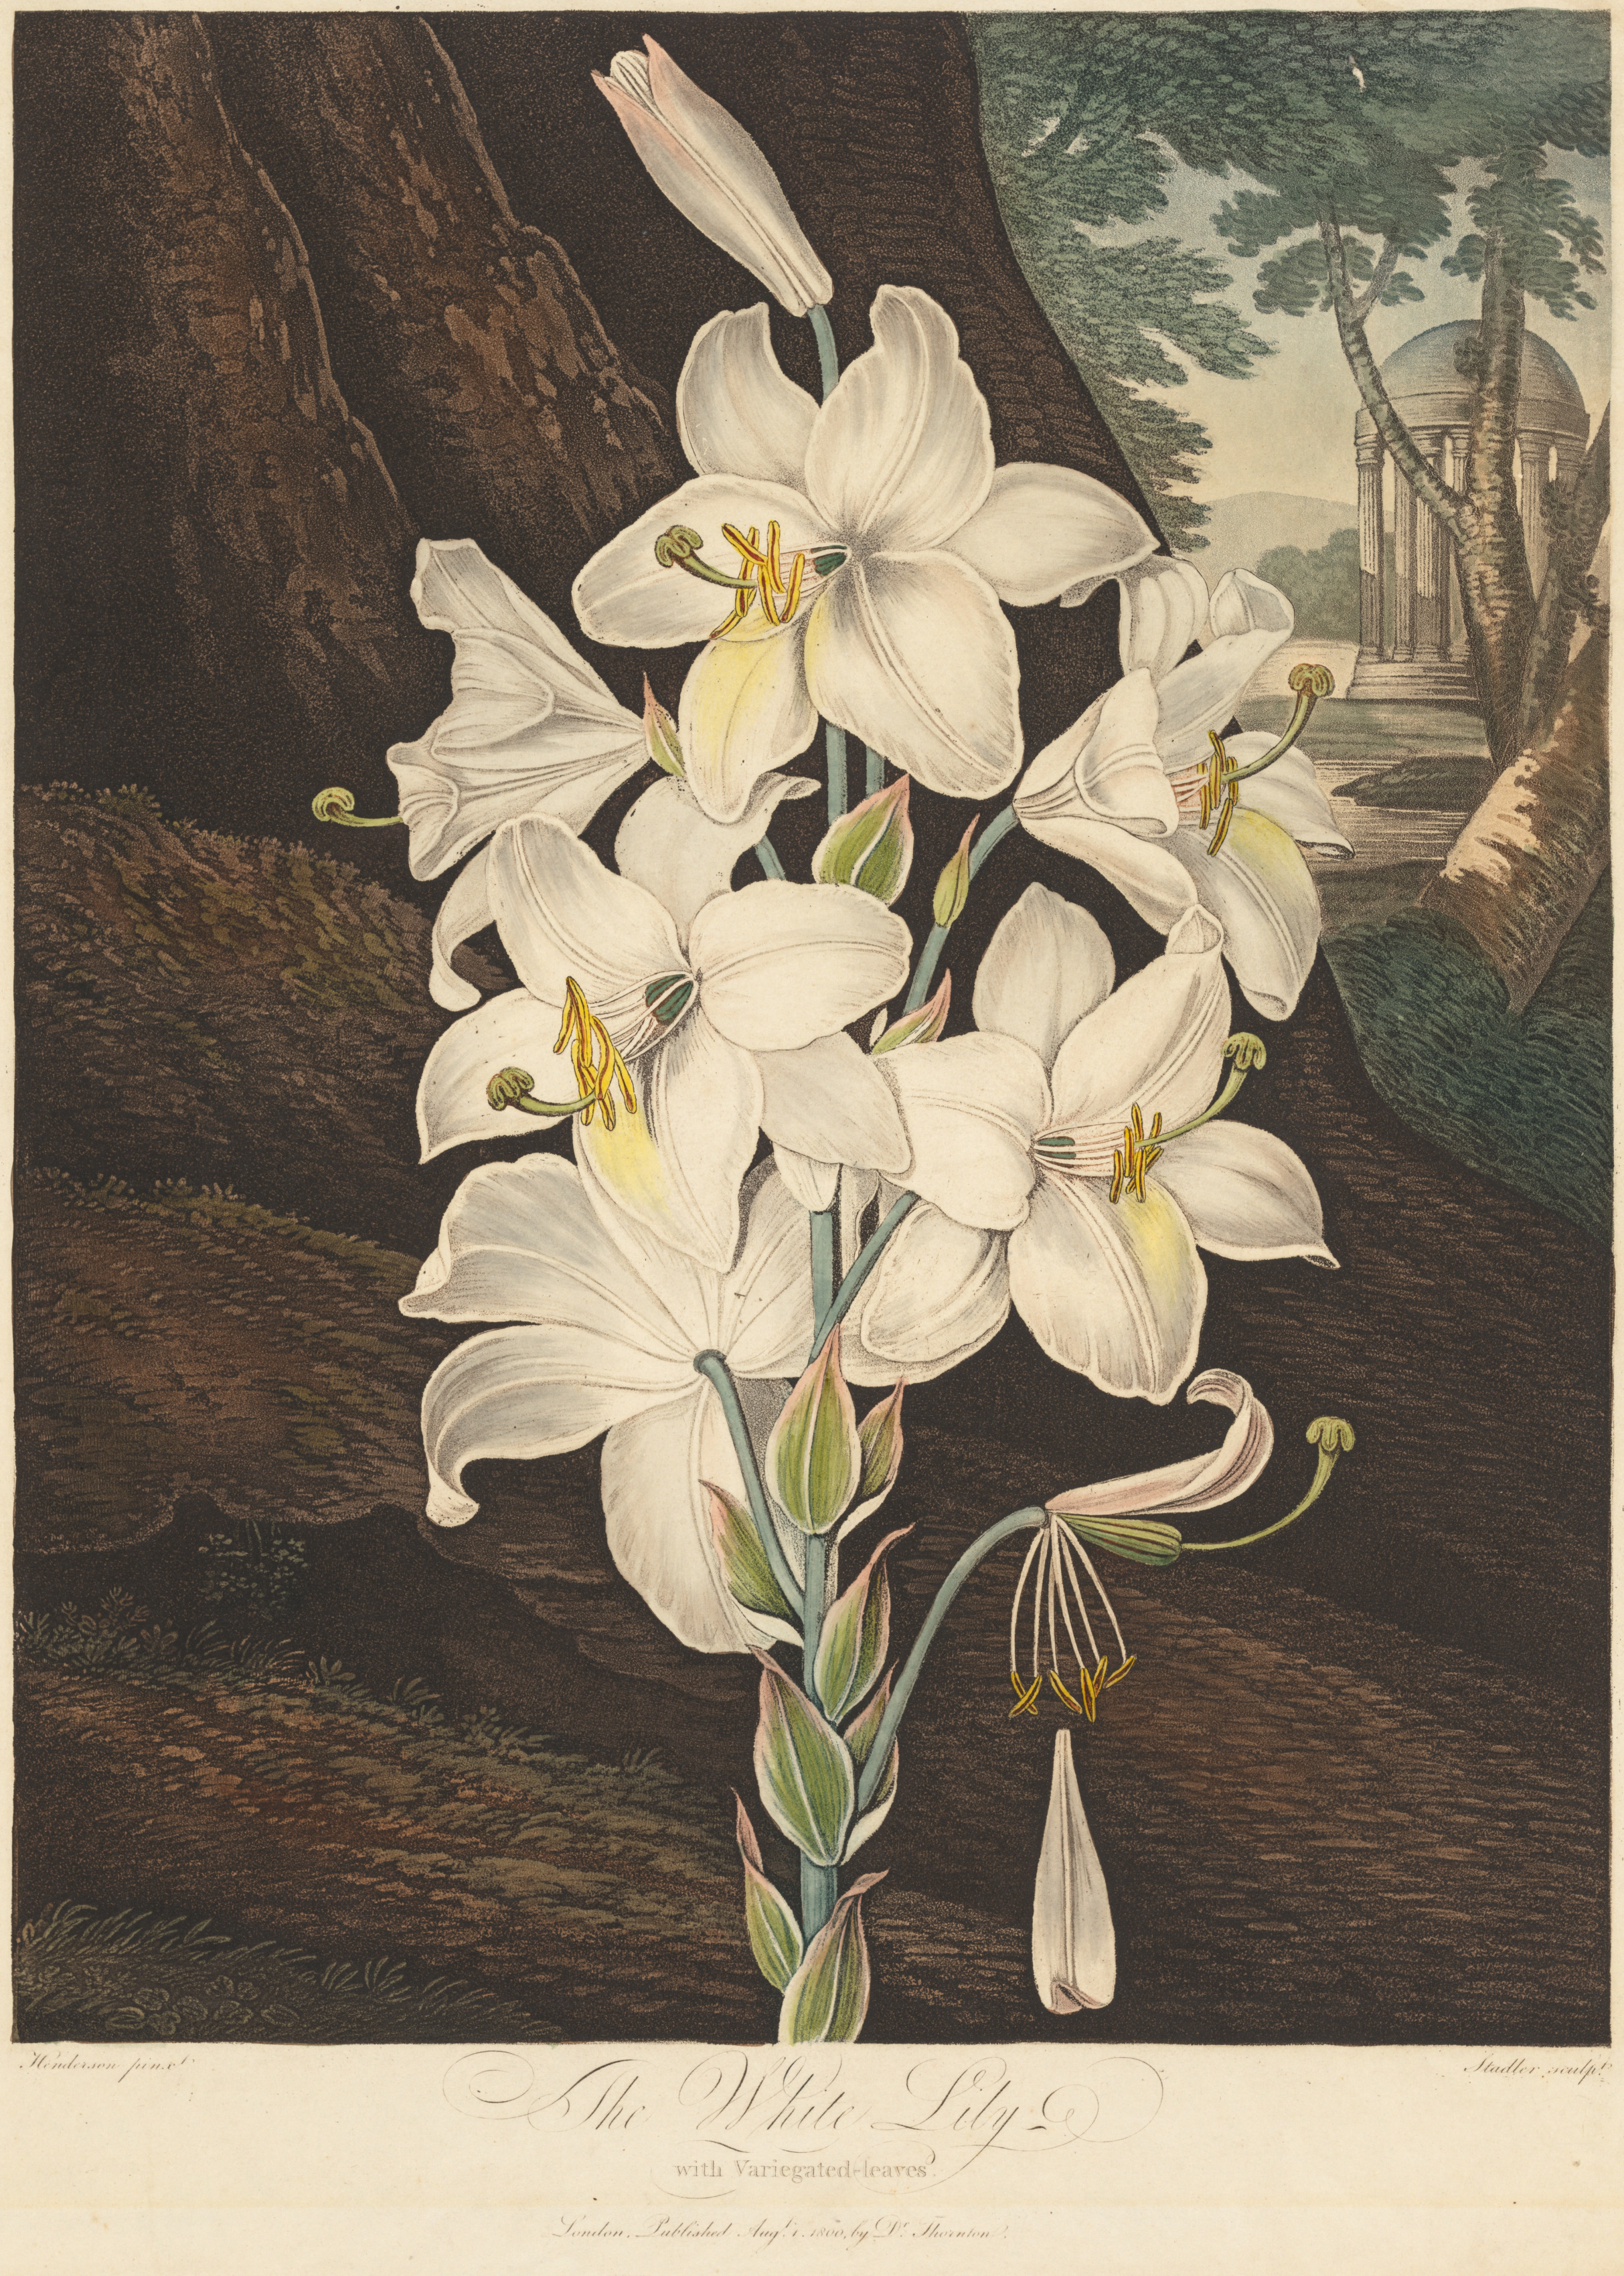 The Temple of Flora; or Garden of Nature: White Lily with Variegated Leaves